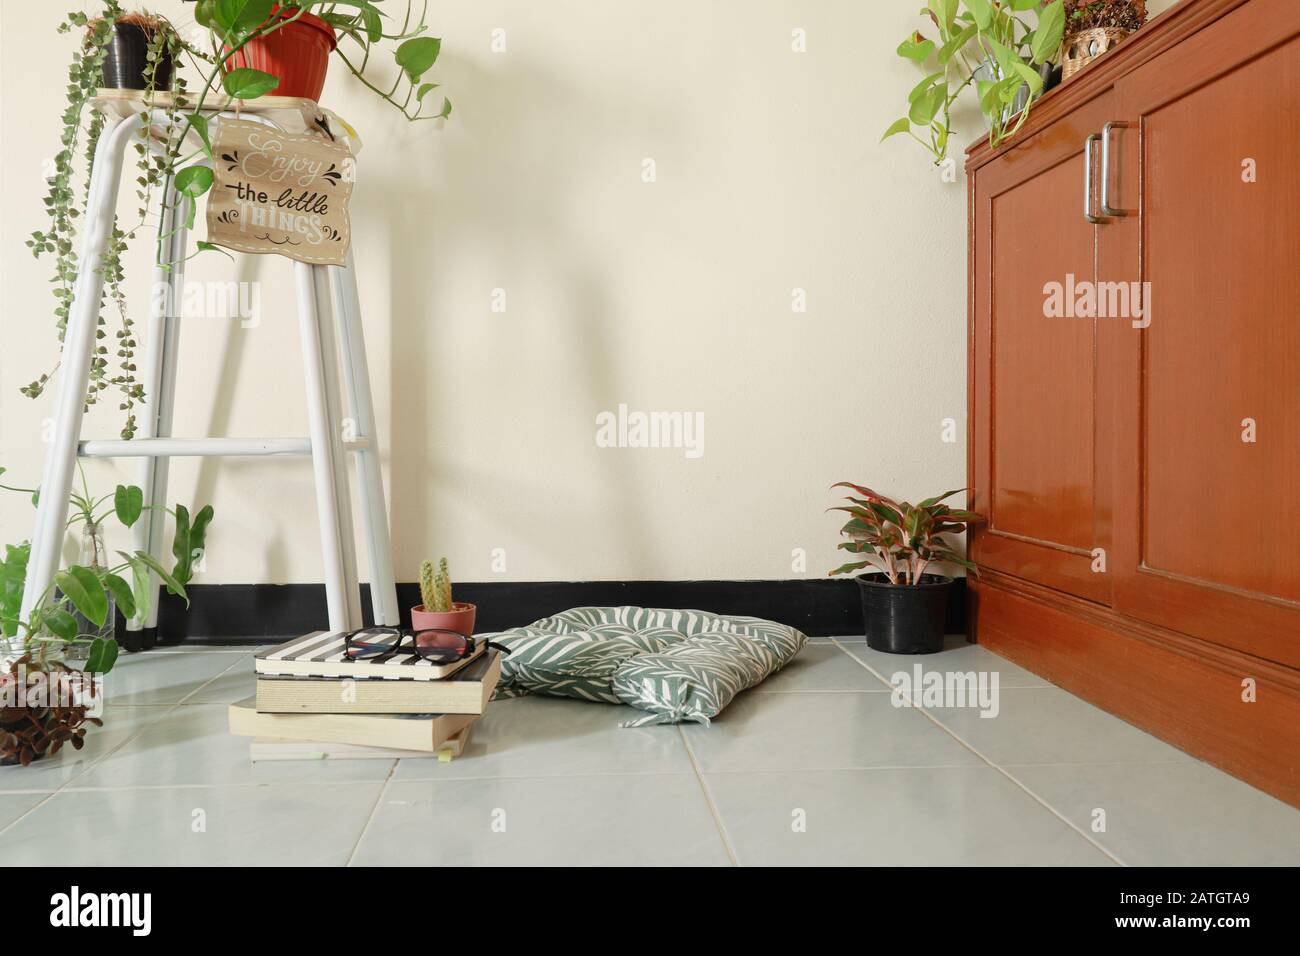 Simple and fresh home decoration for Spring using houseplants to create a calming and gender neutral living space Stock Photo